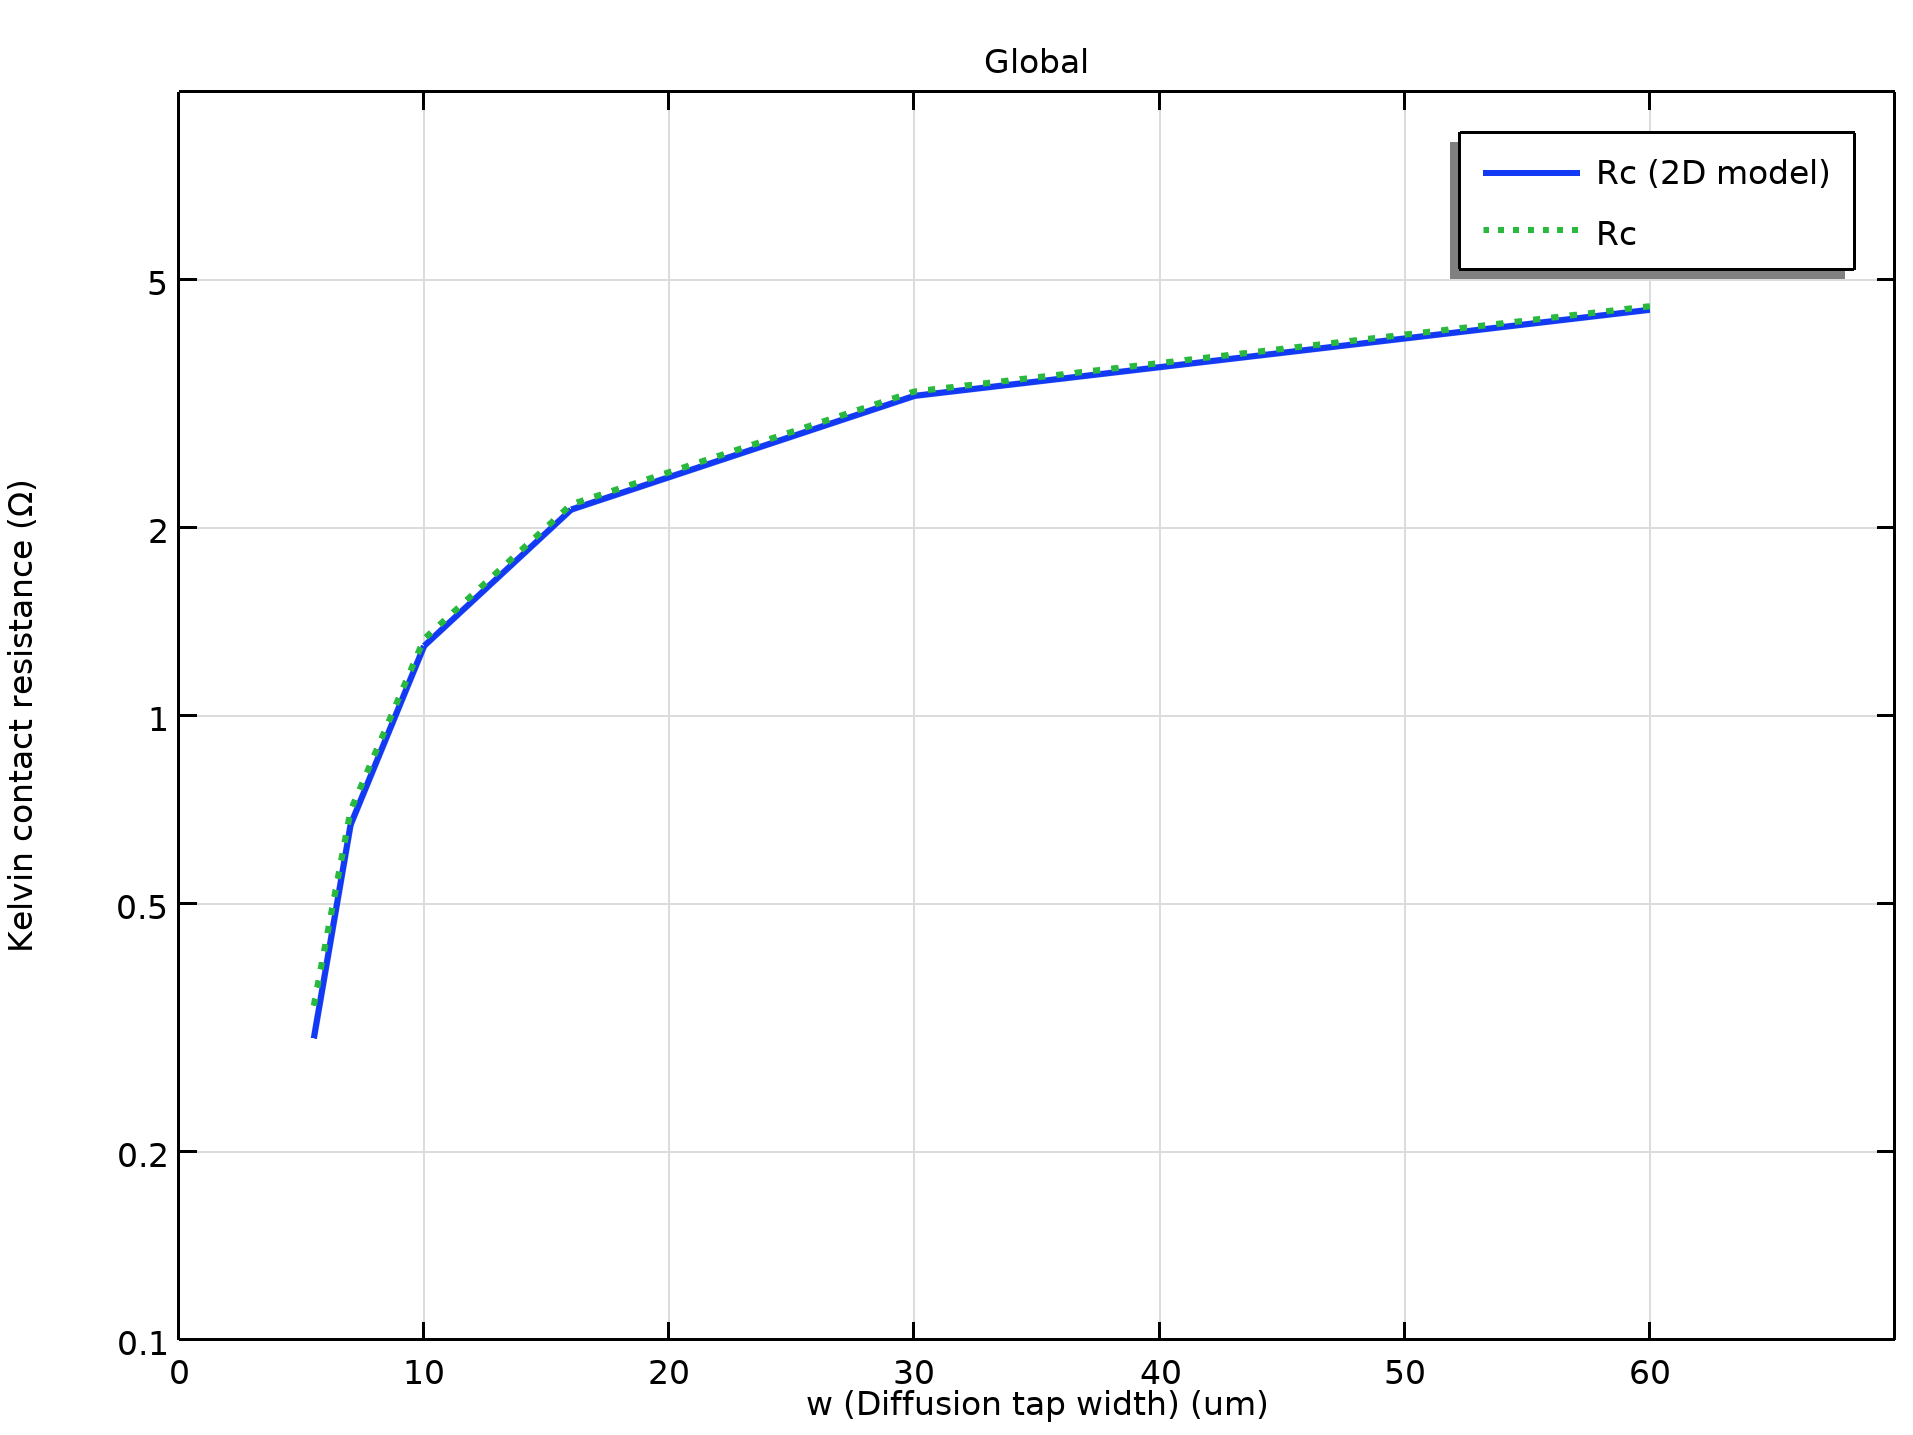 A graph showing the simulated Kelvin contact resistance versus the diffusion tap width.